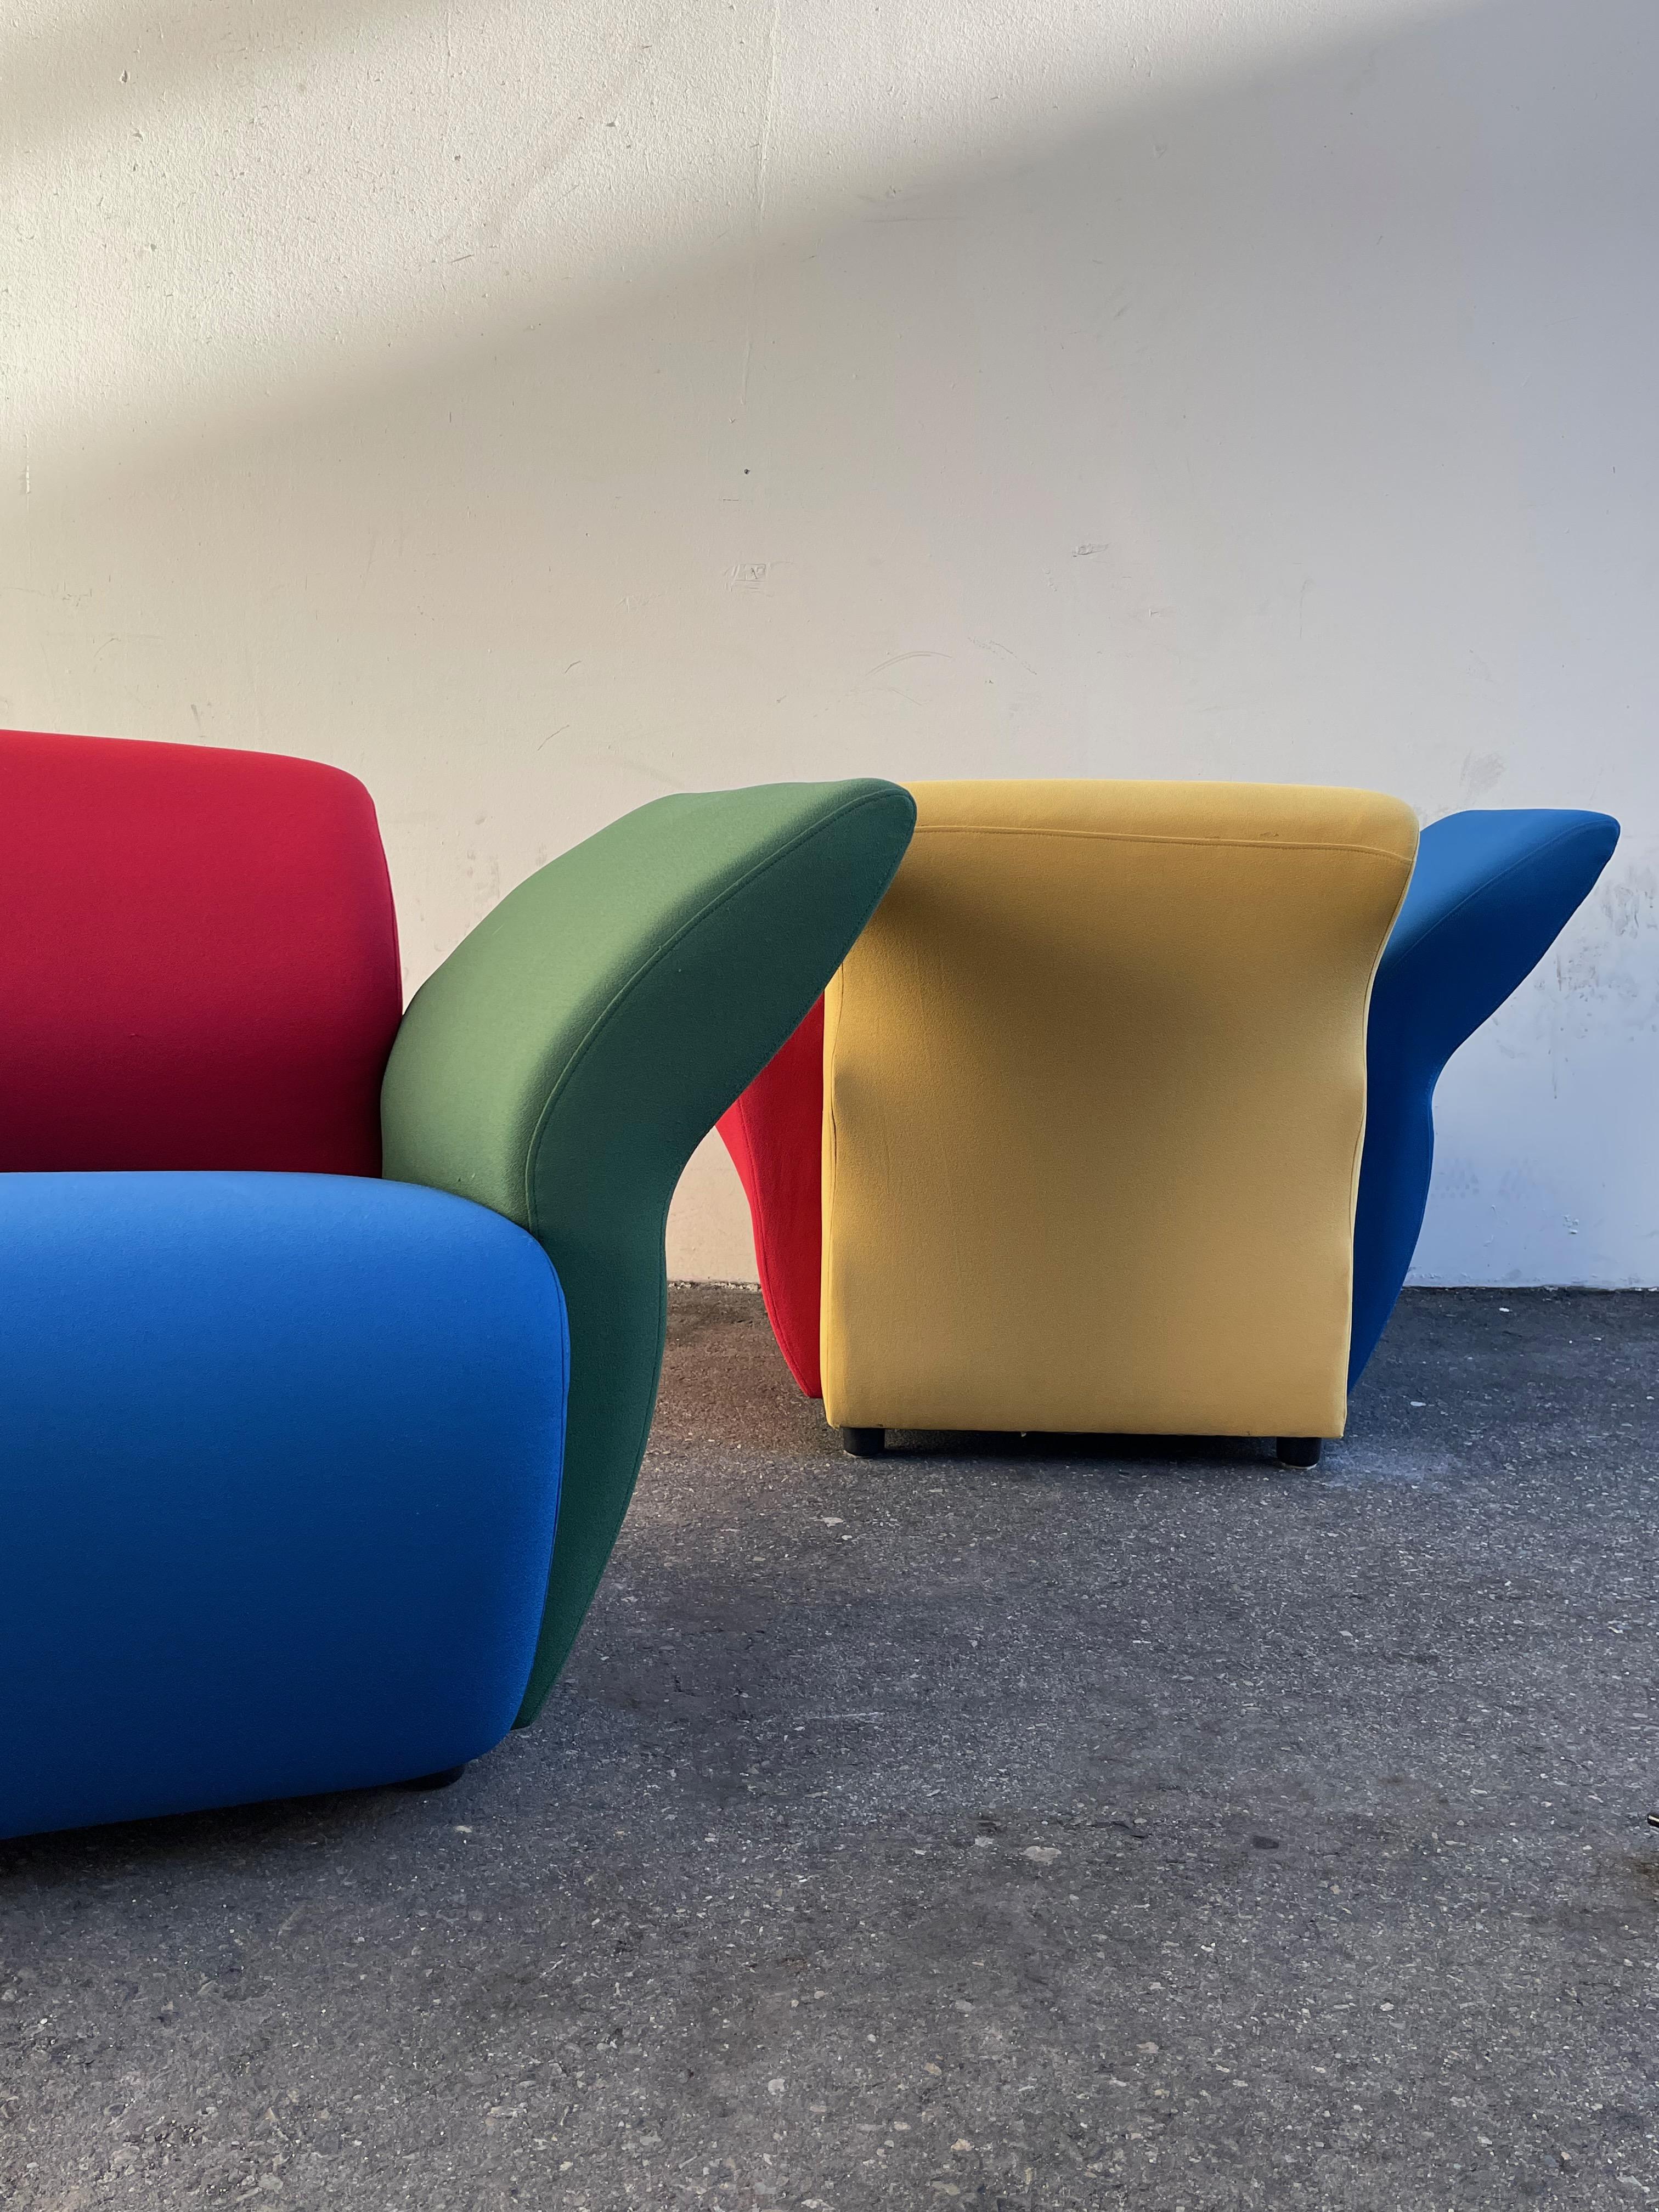 Postmodern Multicolor Lounge Chairs by David Burry, Montreal, 1980s For Sale 2